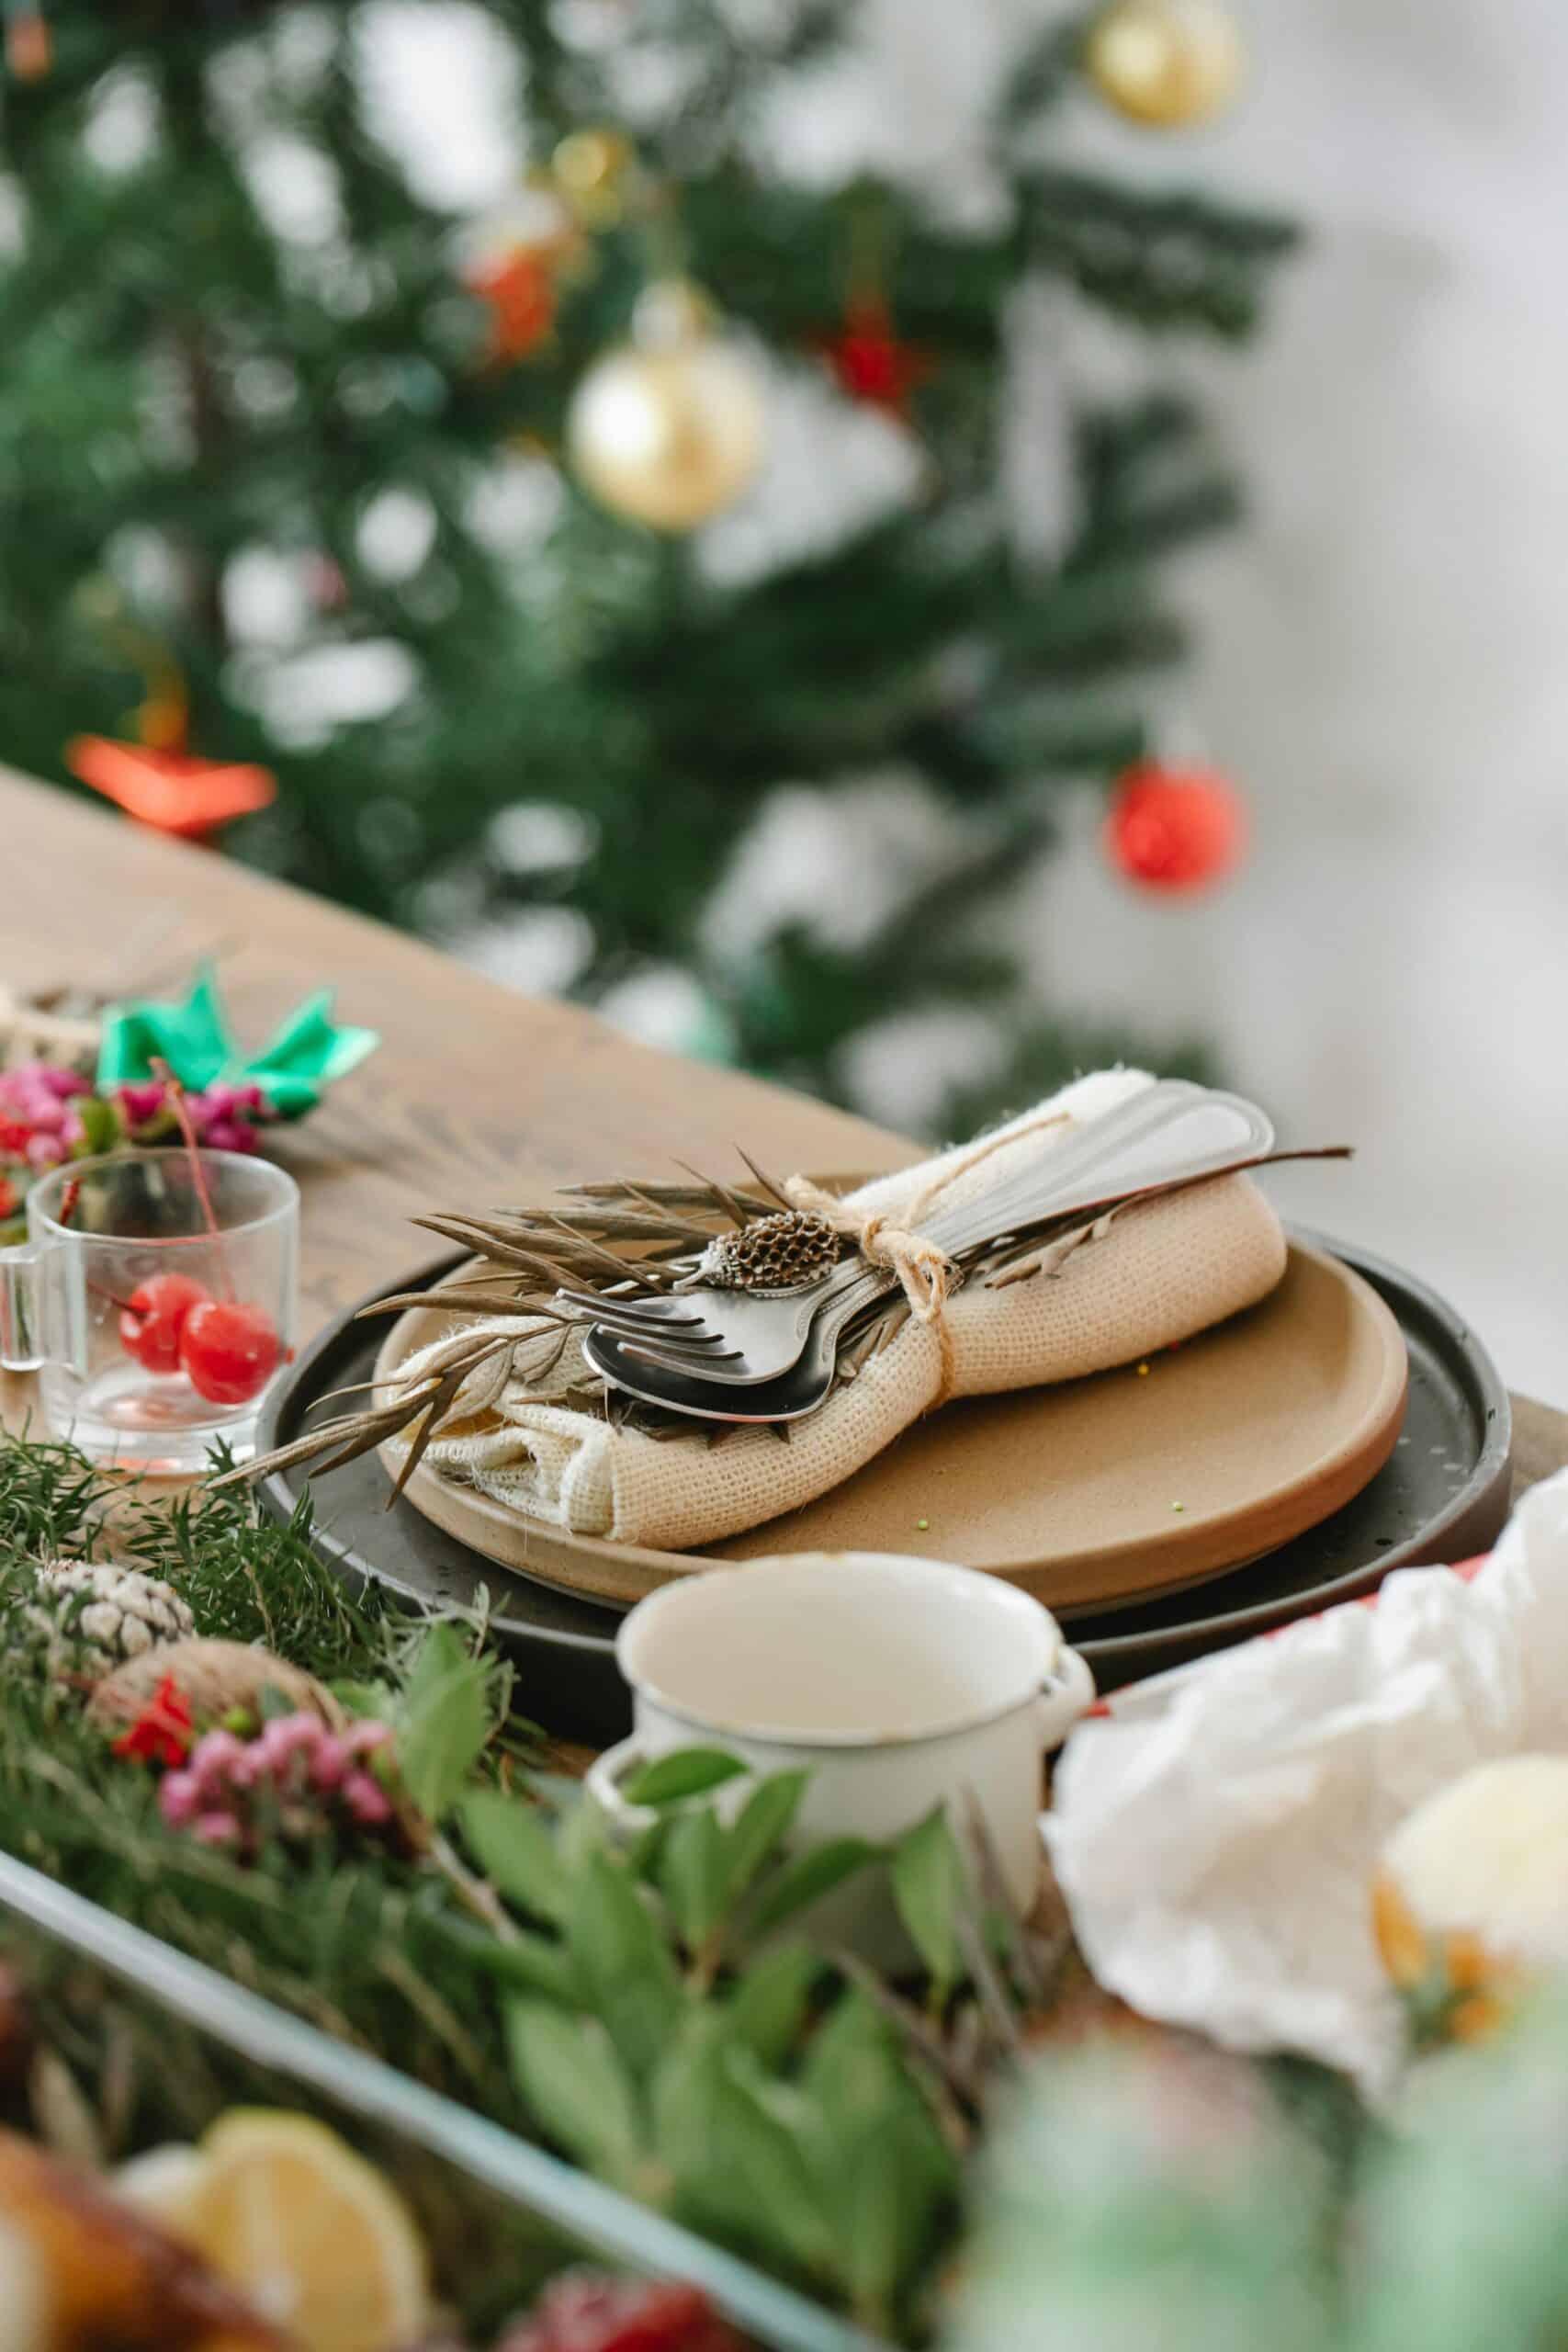 Learn simple tips on how to host a successful holiday dinner party.